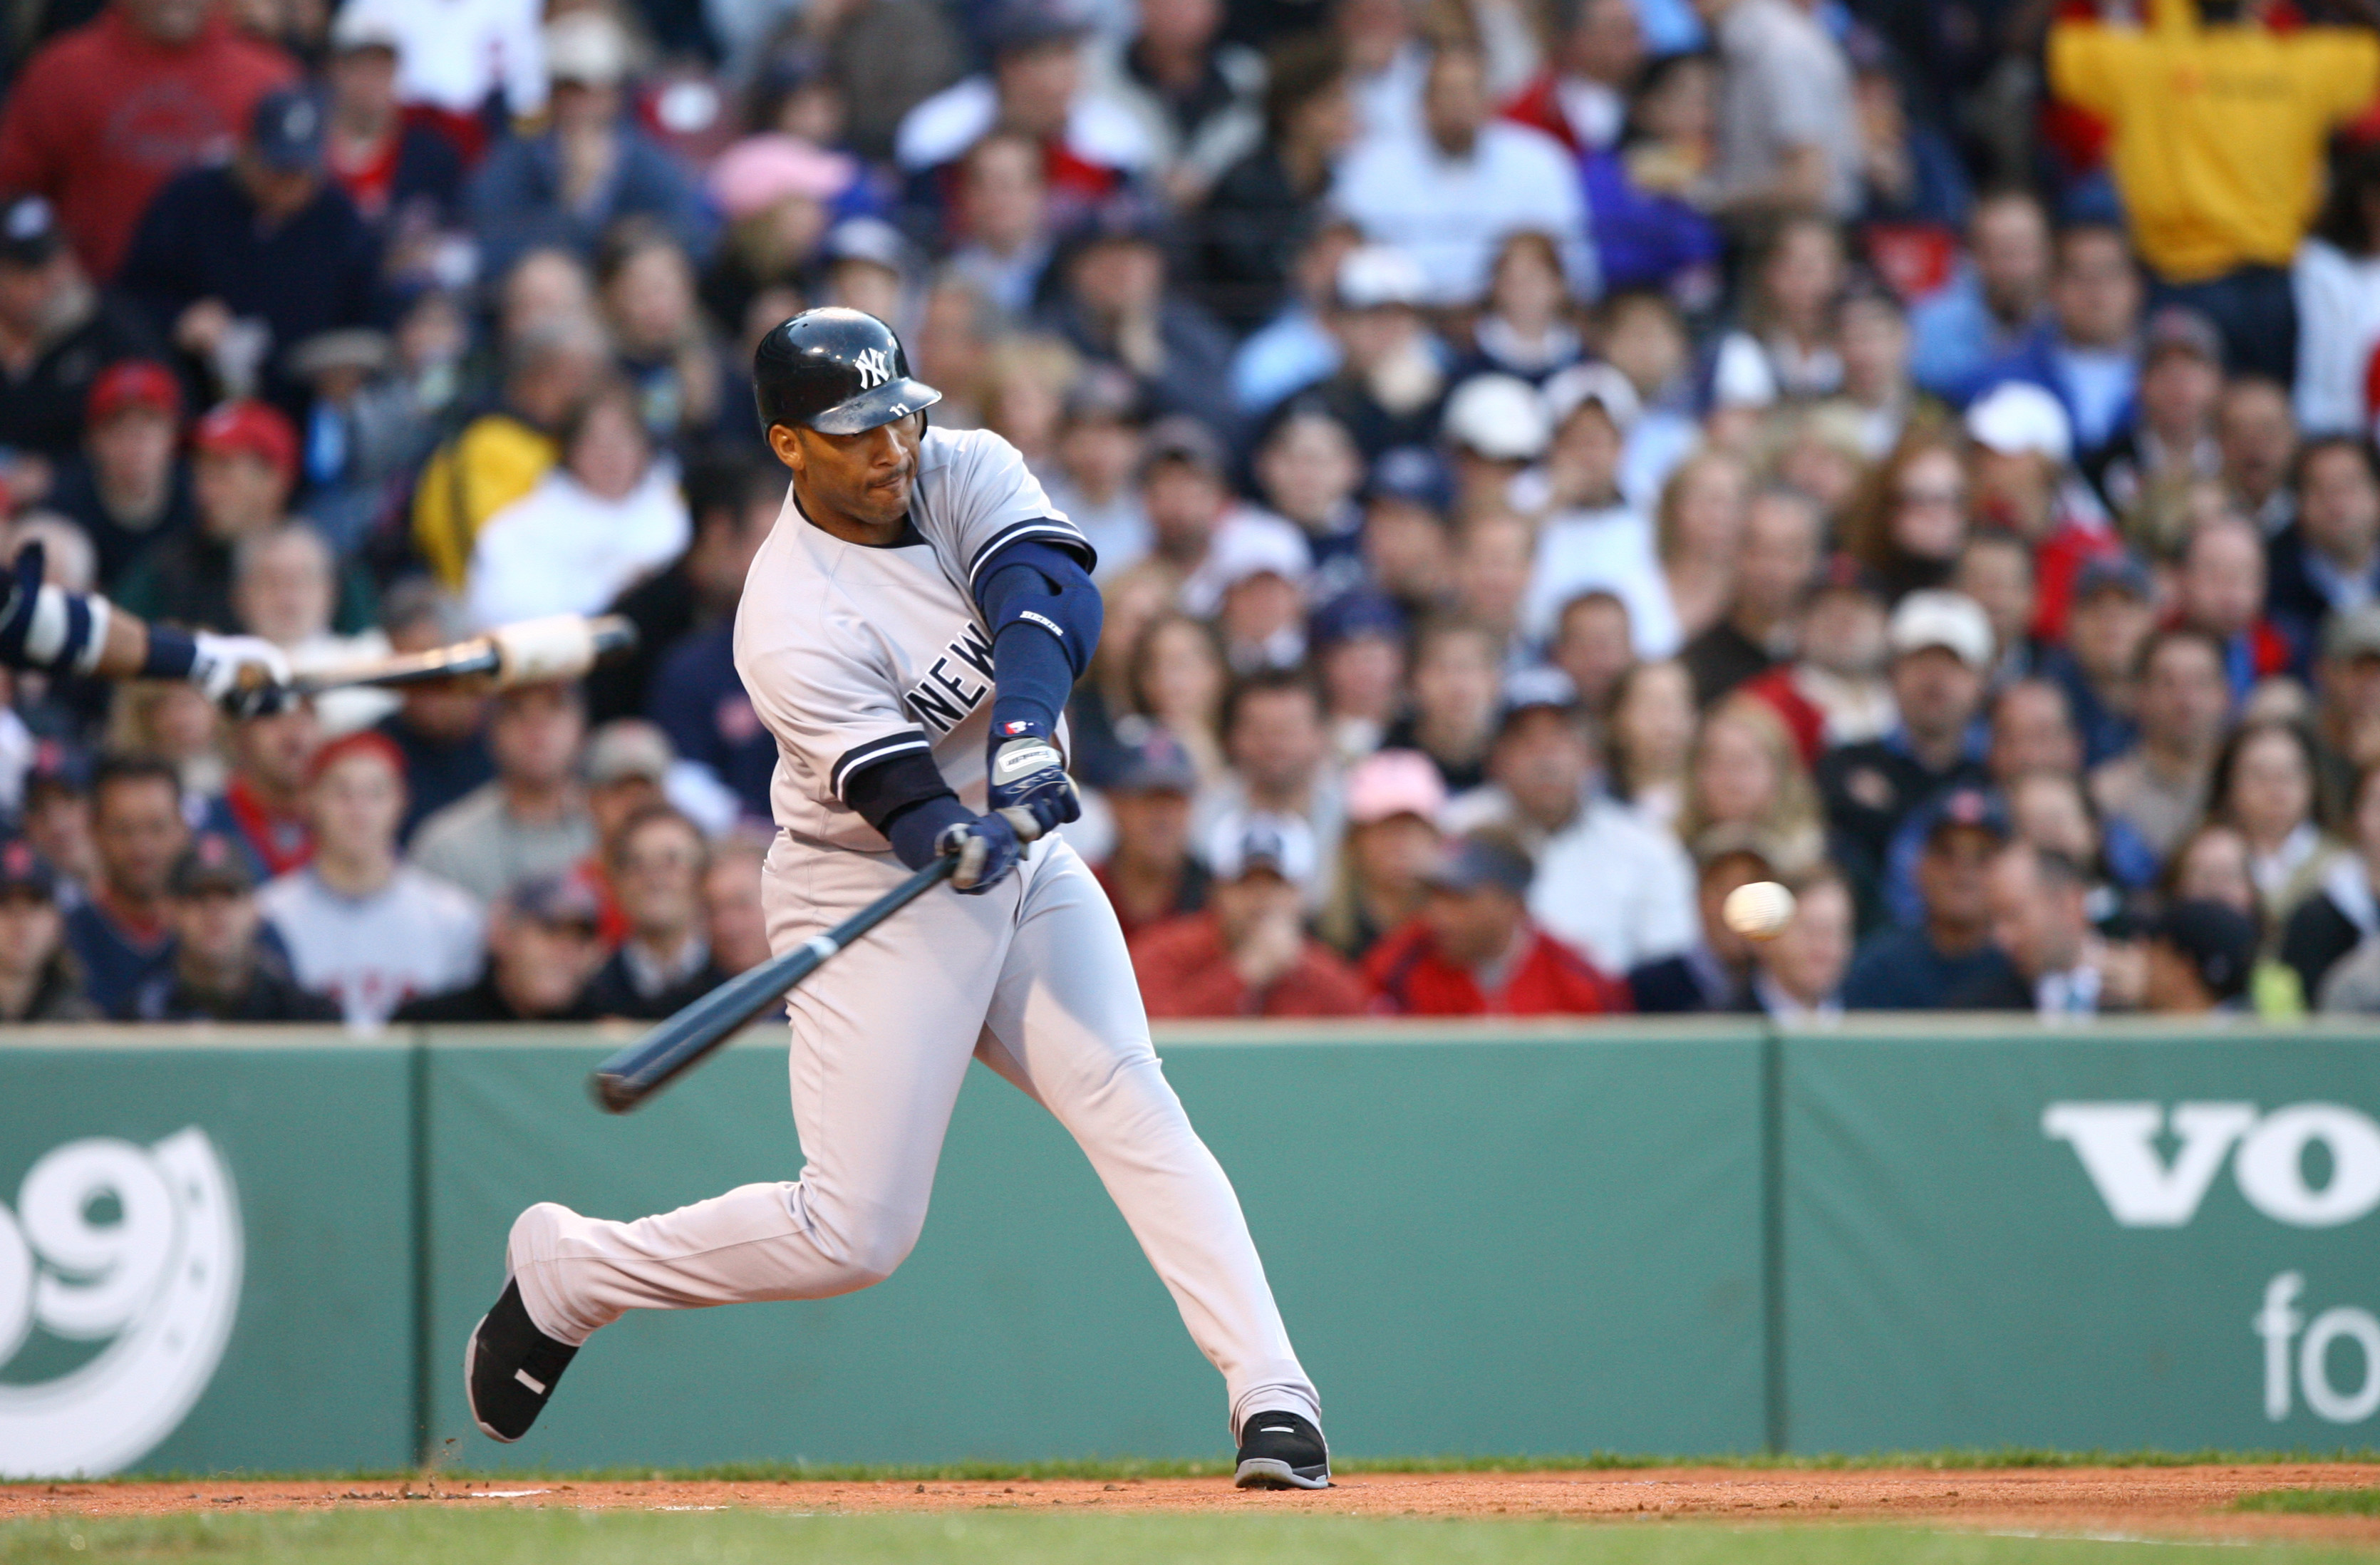 BOSTON ? MAY 23:  Outfielder Gary Sheffield #11 of the New York Yankees swings at a Boston Red Sox pitch during their game on May 23, 2006 at Fenway Park, in Boston Massachusetts. The Yankees won 7-5.  (Photo by Al Bello/Getty Images)